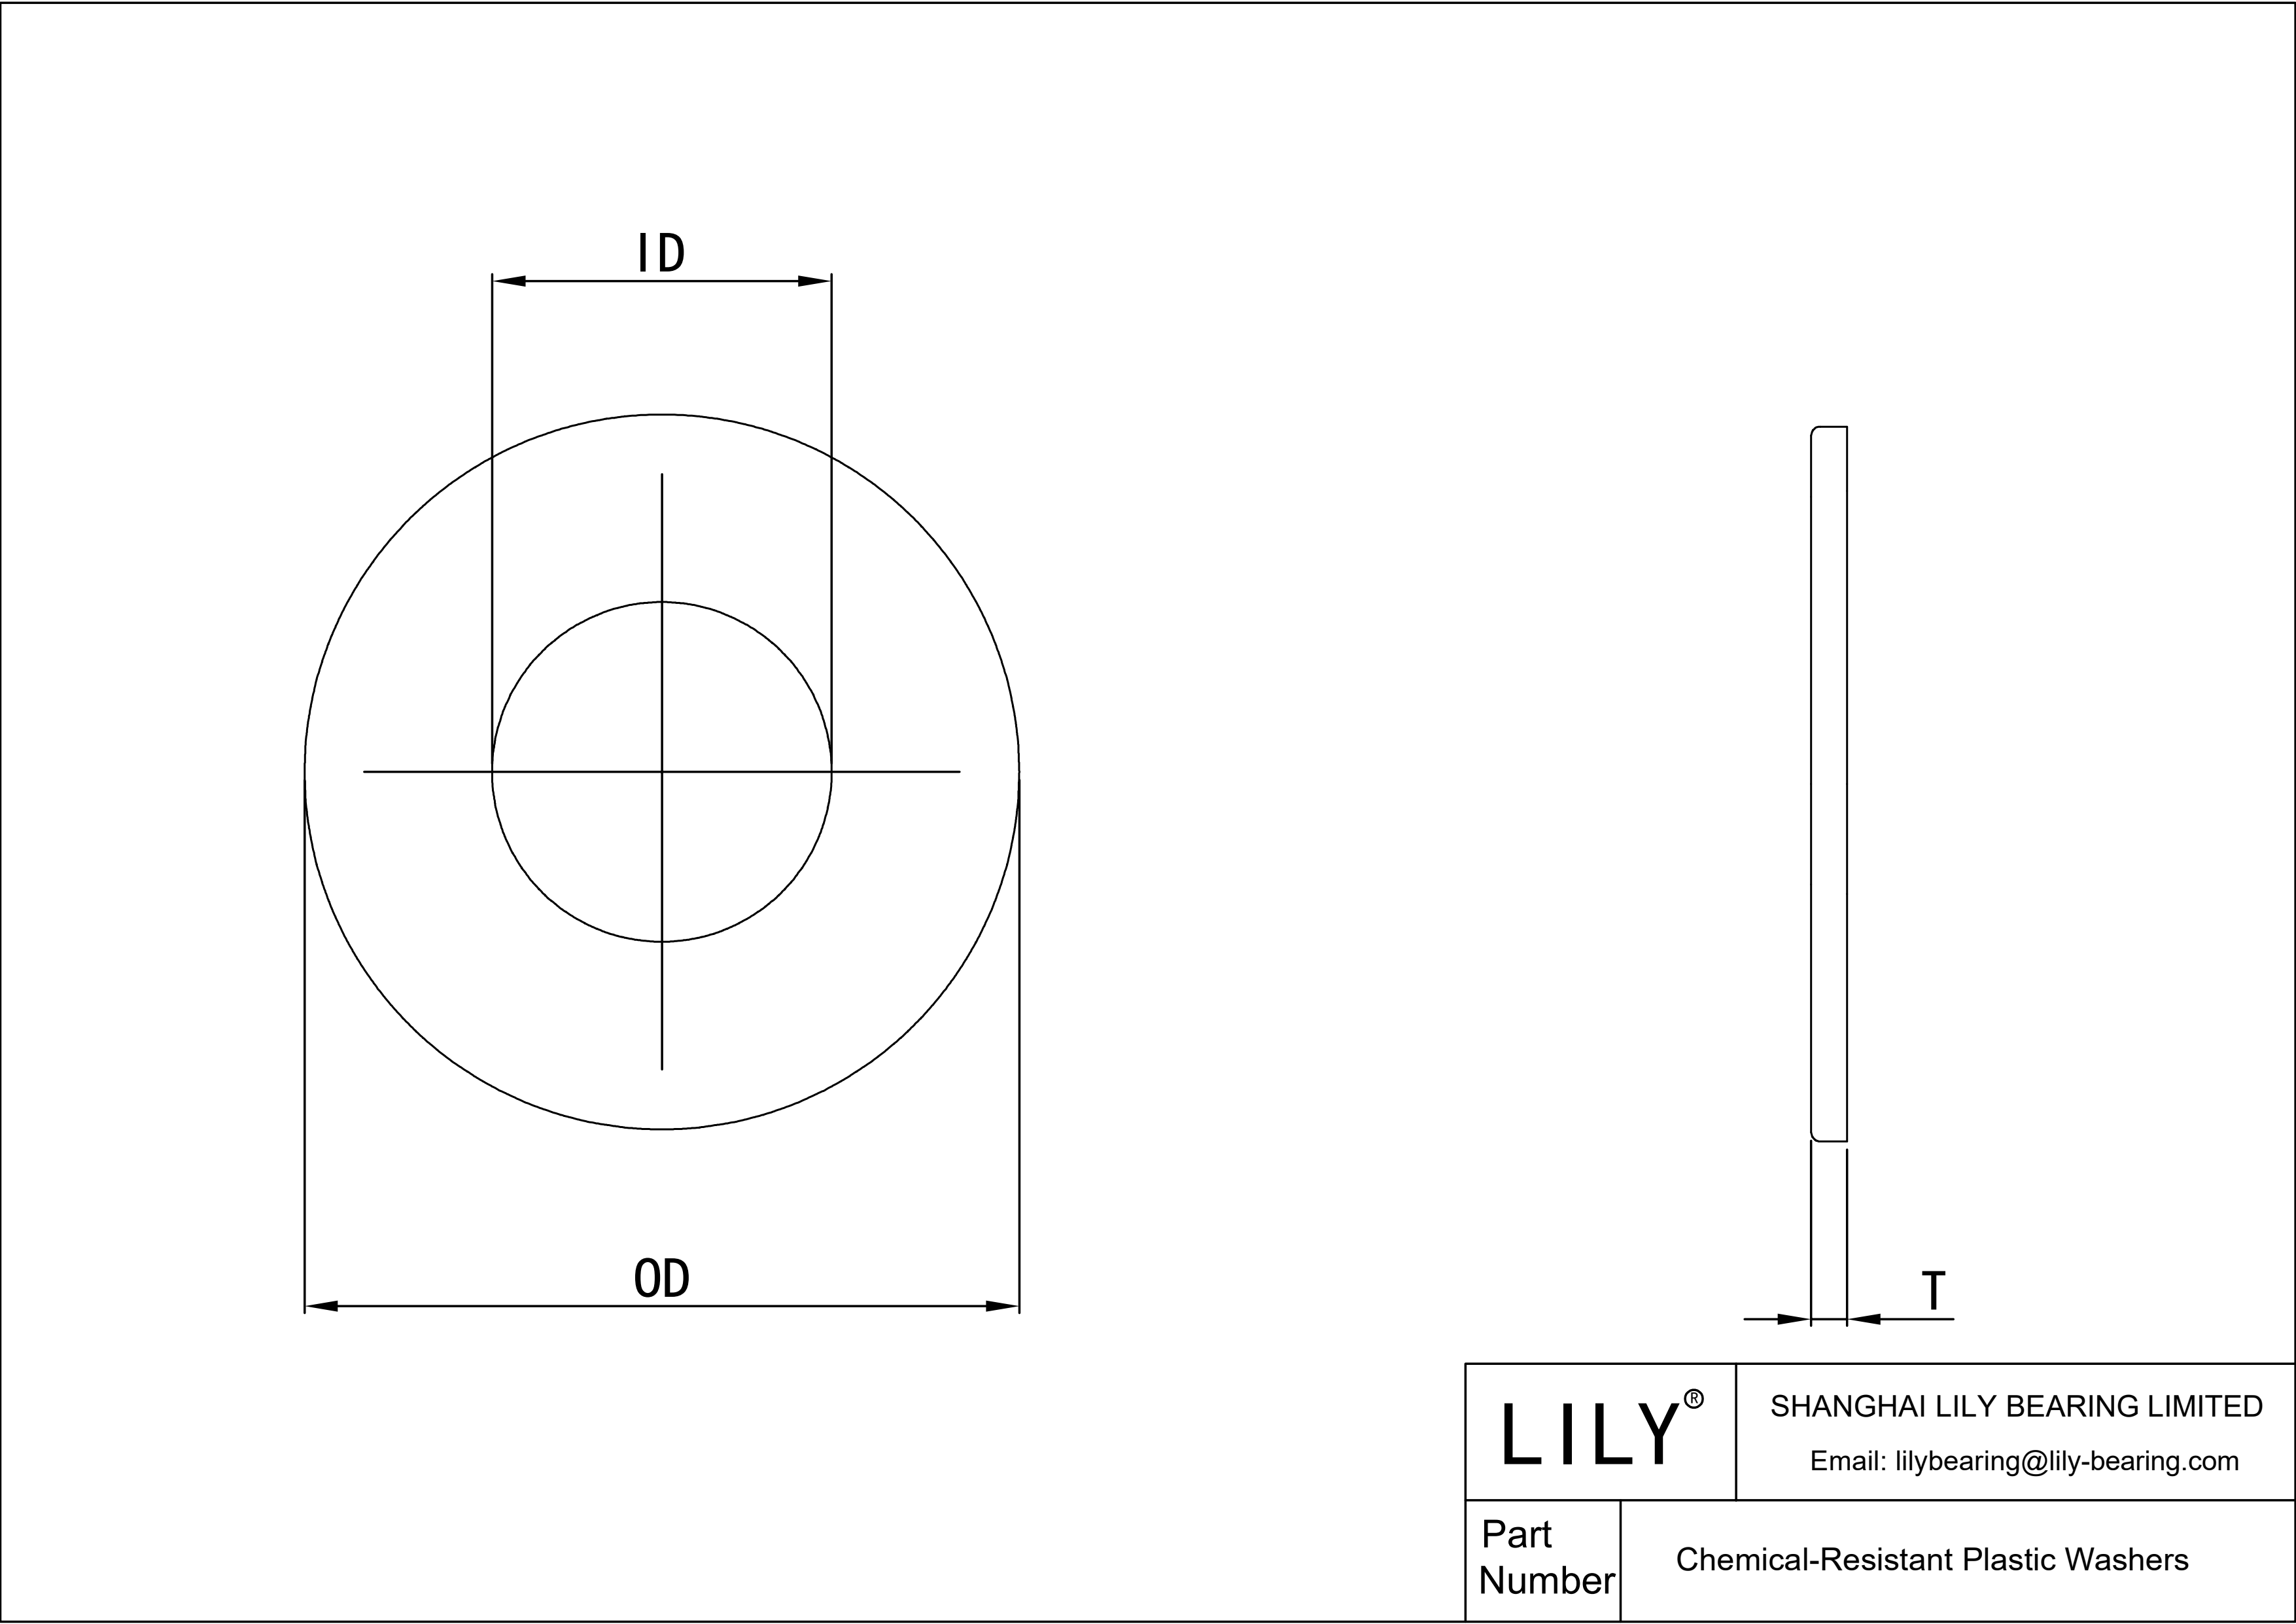 JFGDAABBH Chemical-Resistant Plastic Washers cad drawing